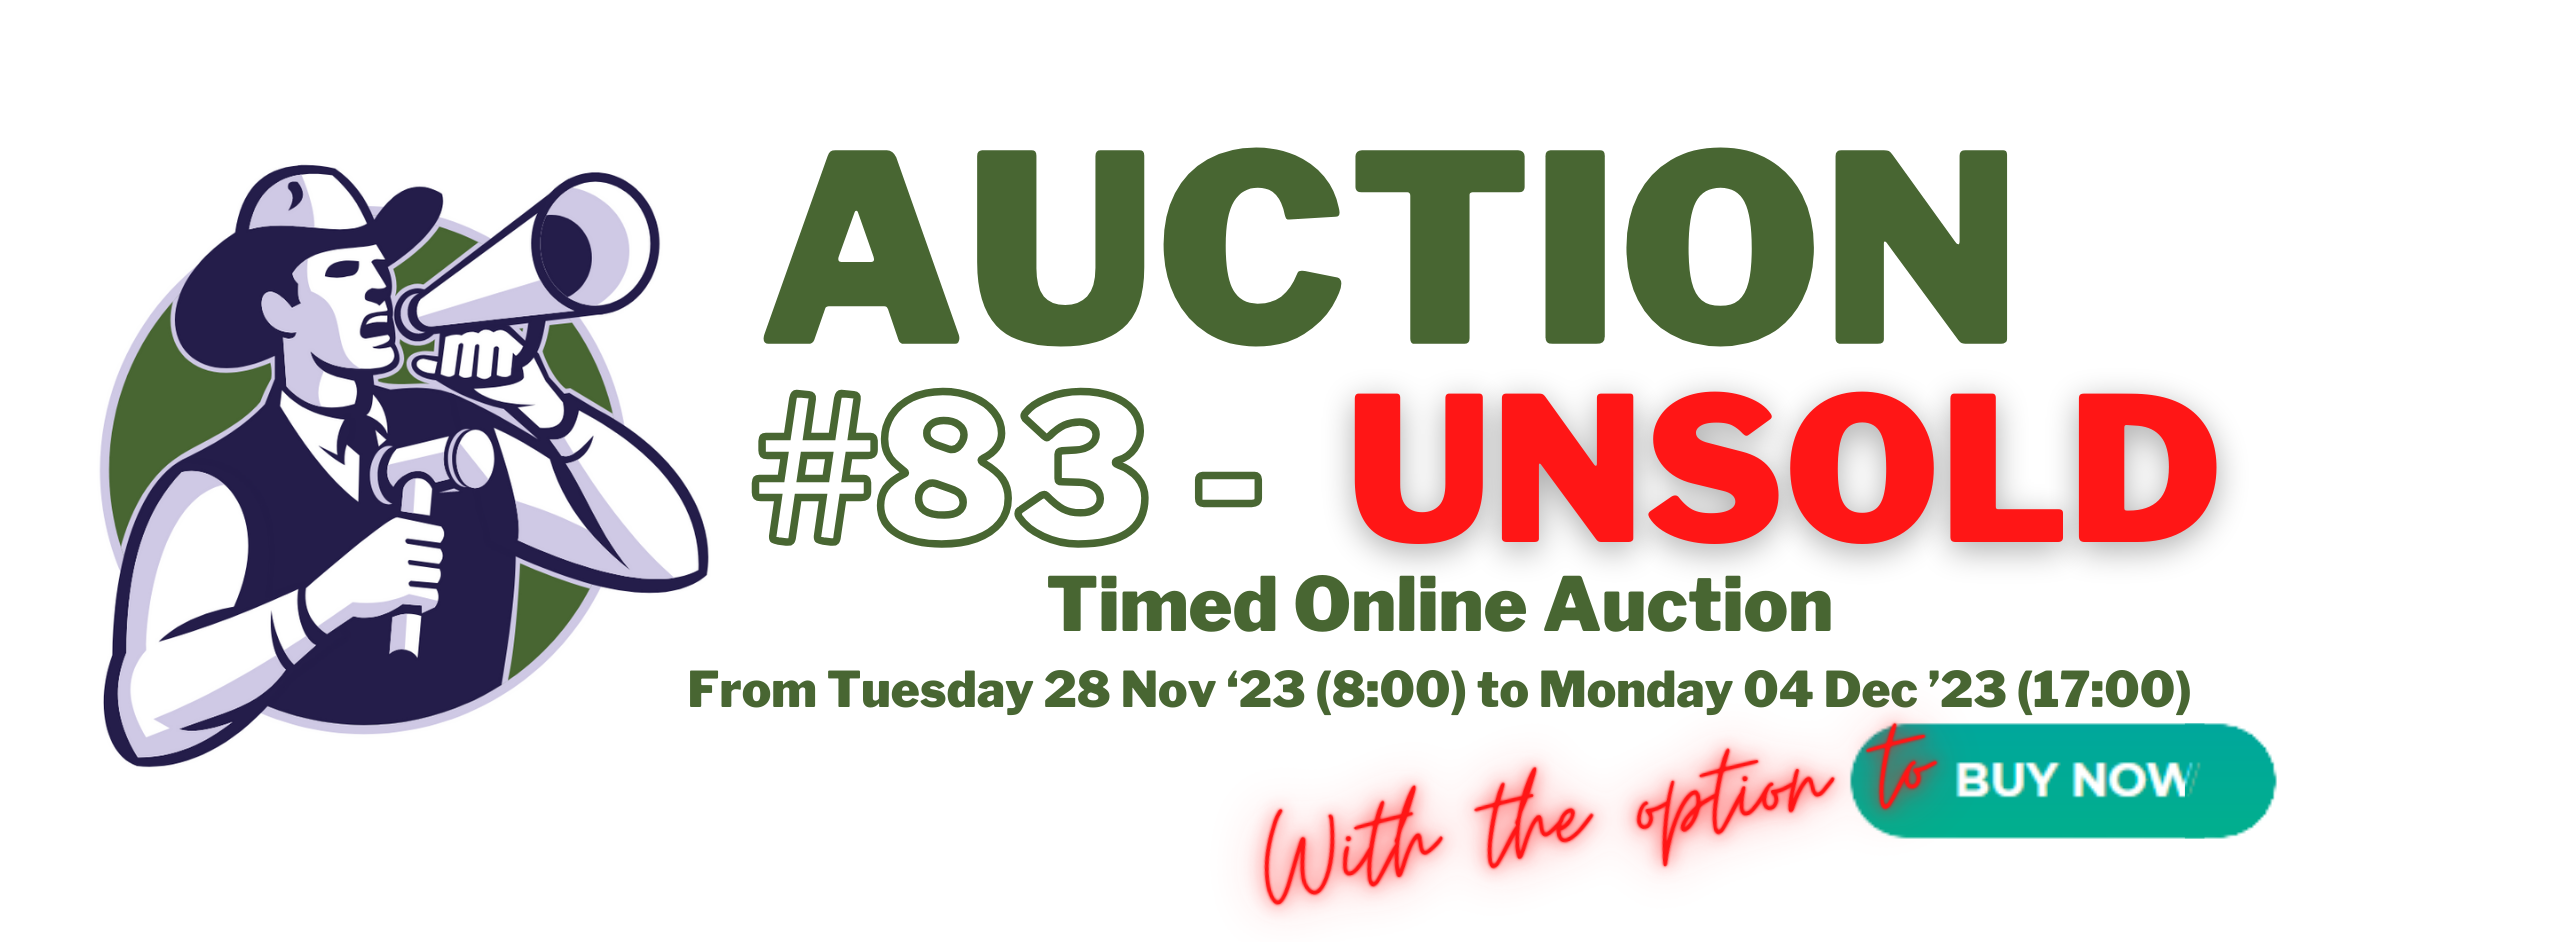 Auction 83-Unsold Items